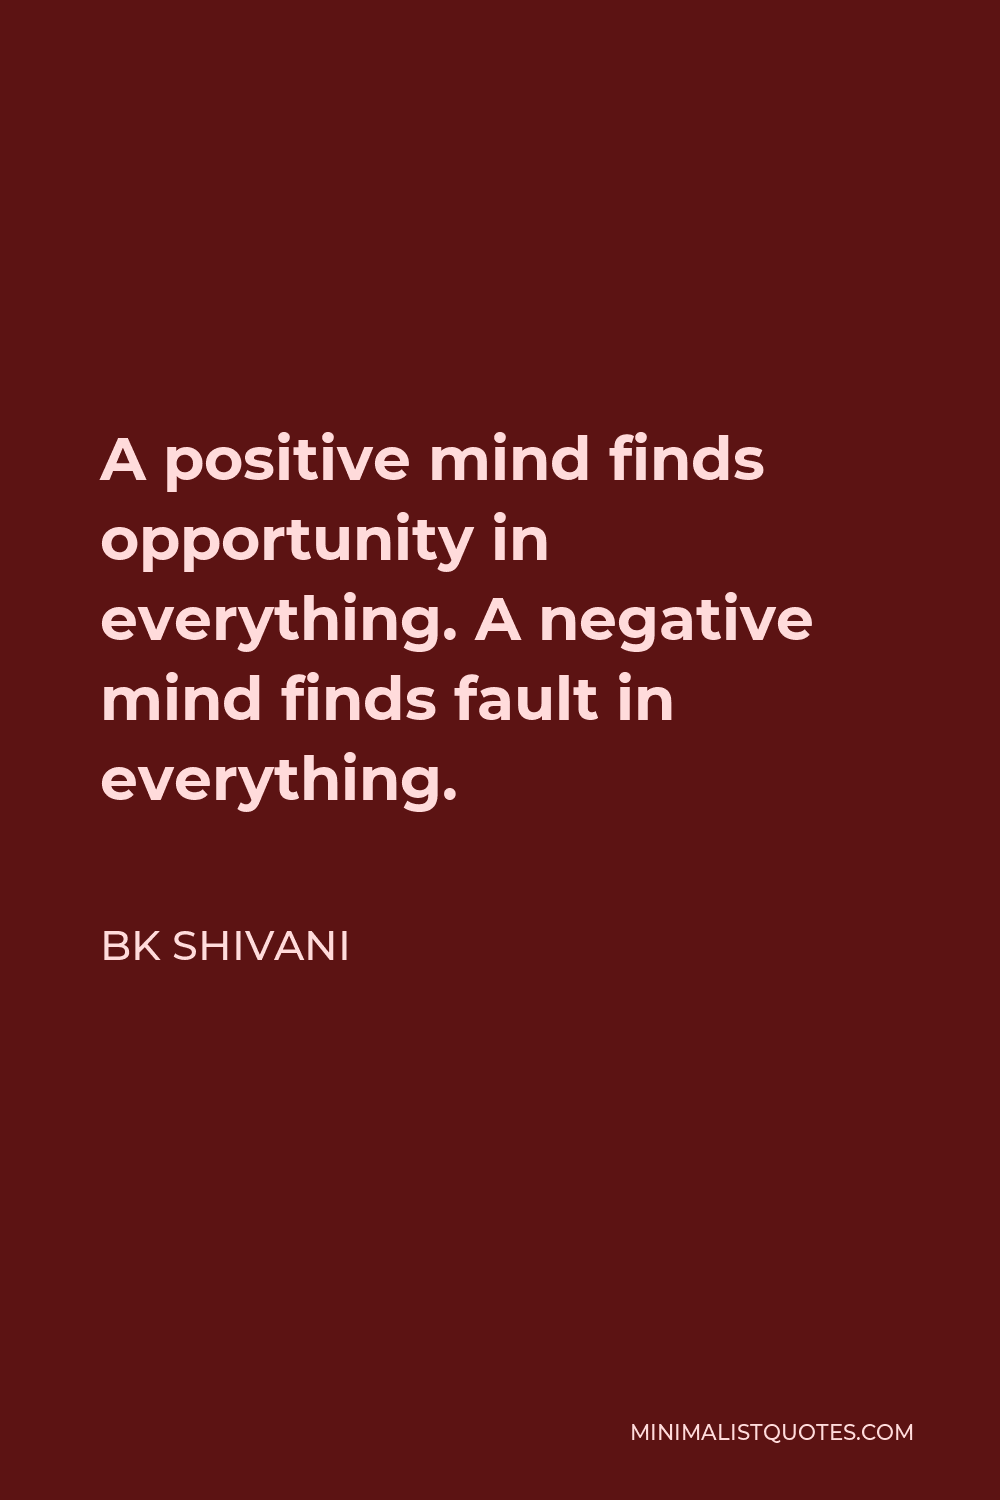 BK Shivani Quote - A positive mind finds opportunity in everything. A negative mind finds fault in everything.